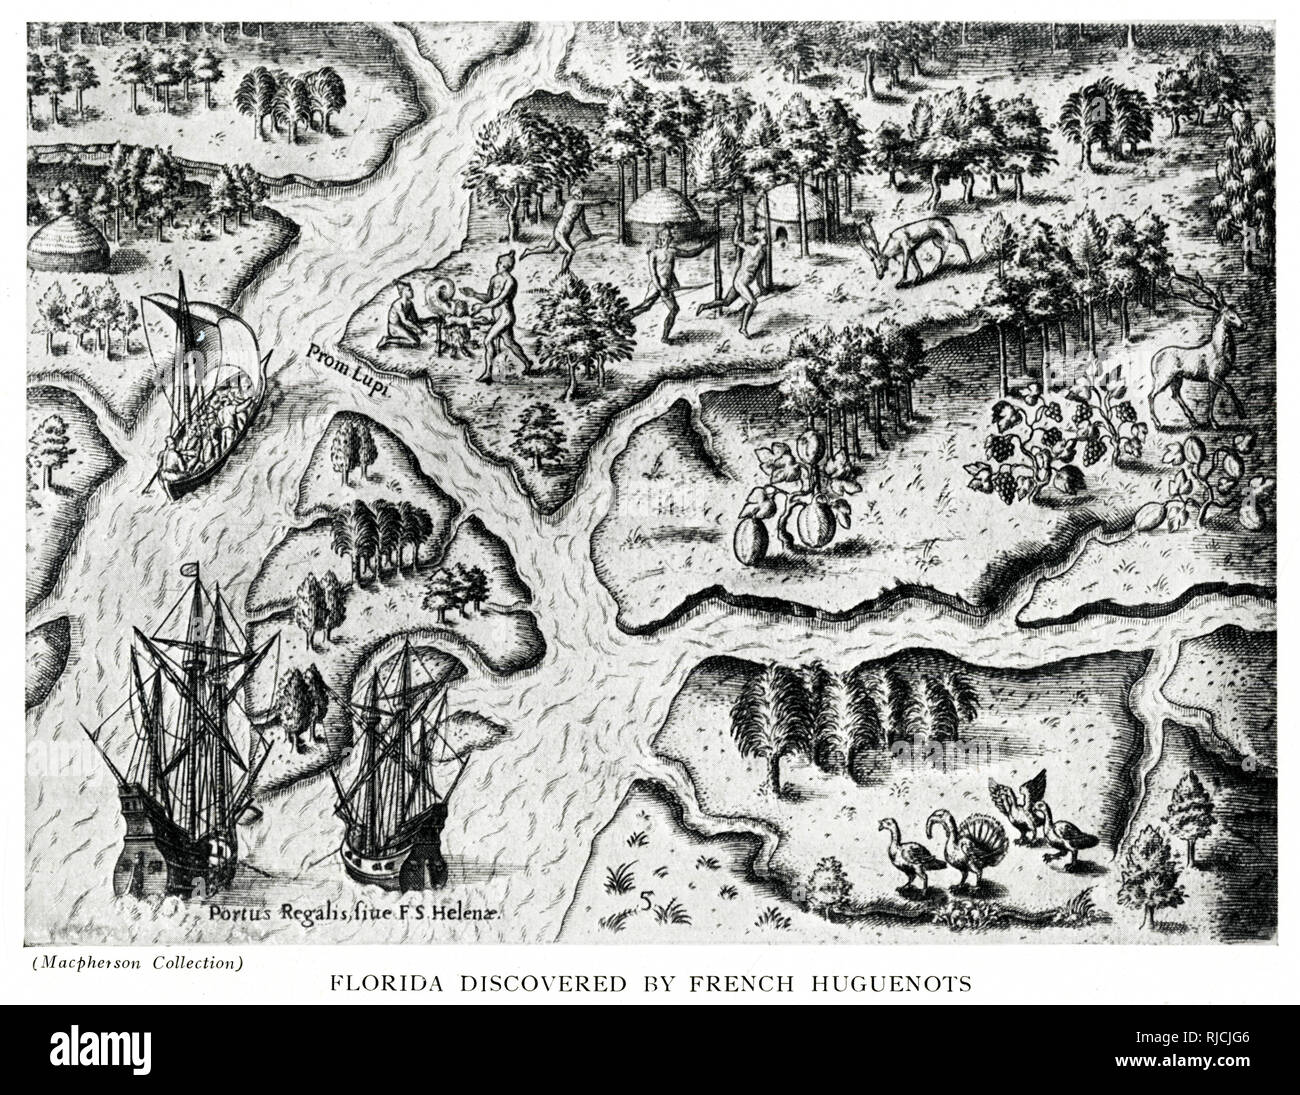 Florida Discovered by French Huguenots Stock Photo